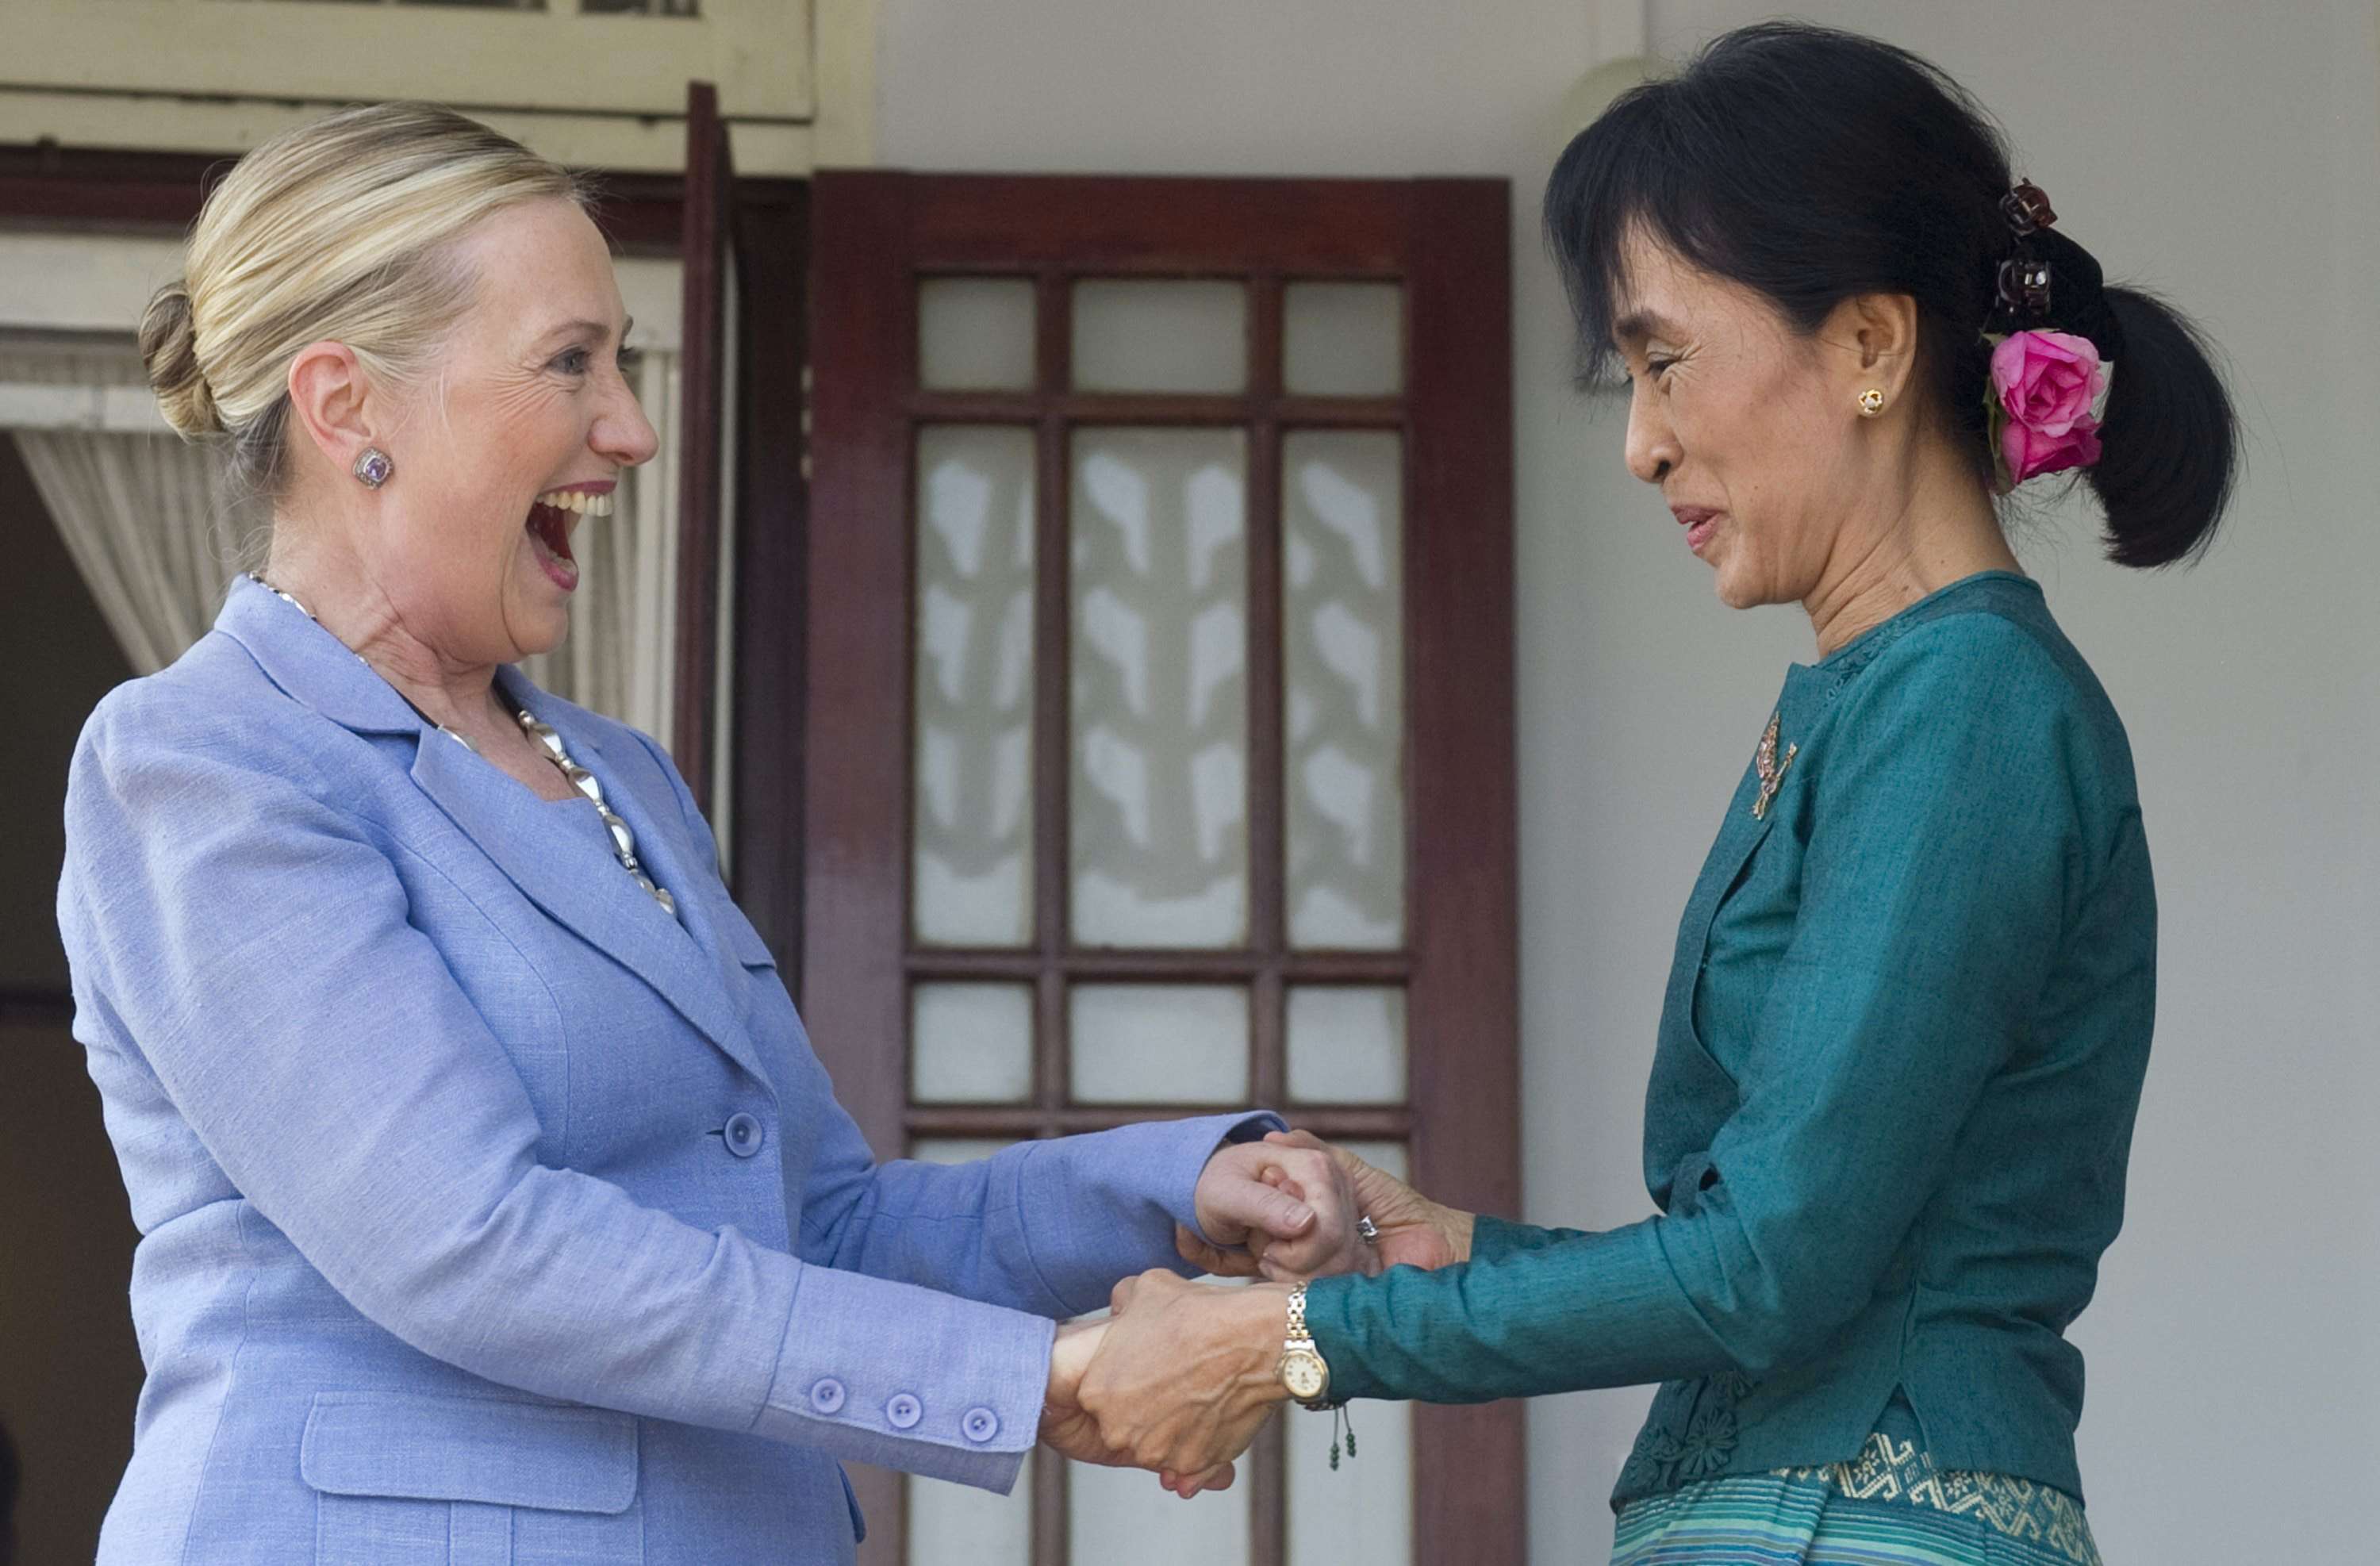 US Secretary of State Hillary Clinton meets Myanmar’s pro-democracy leader Aung San Suu Kyi in Yangon, Myanmar, in 2011. The pair are close friends. Photo: AP